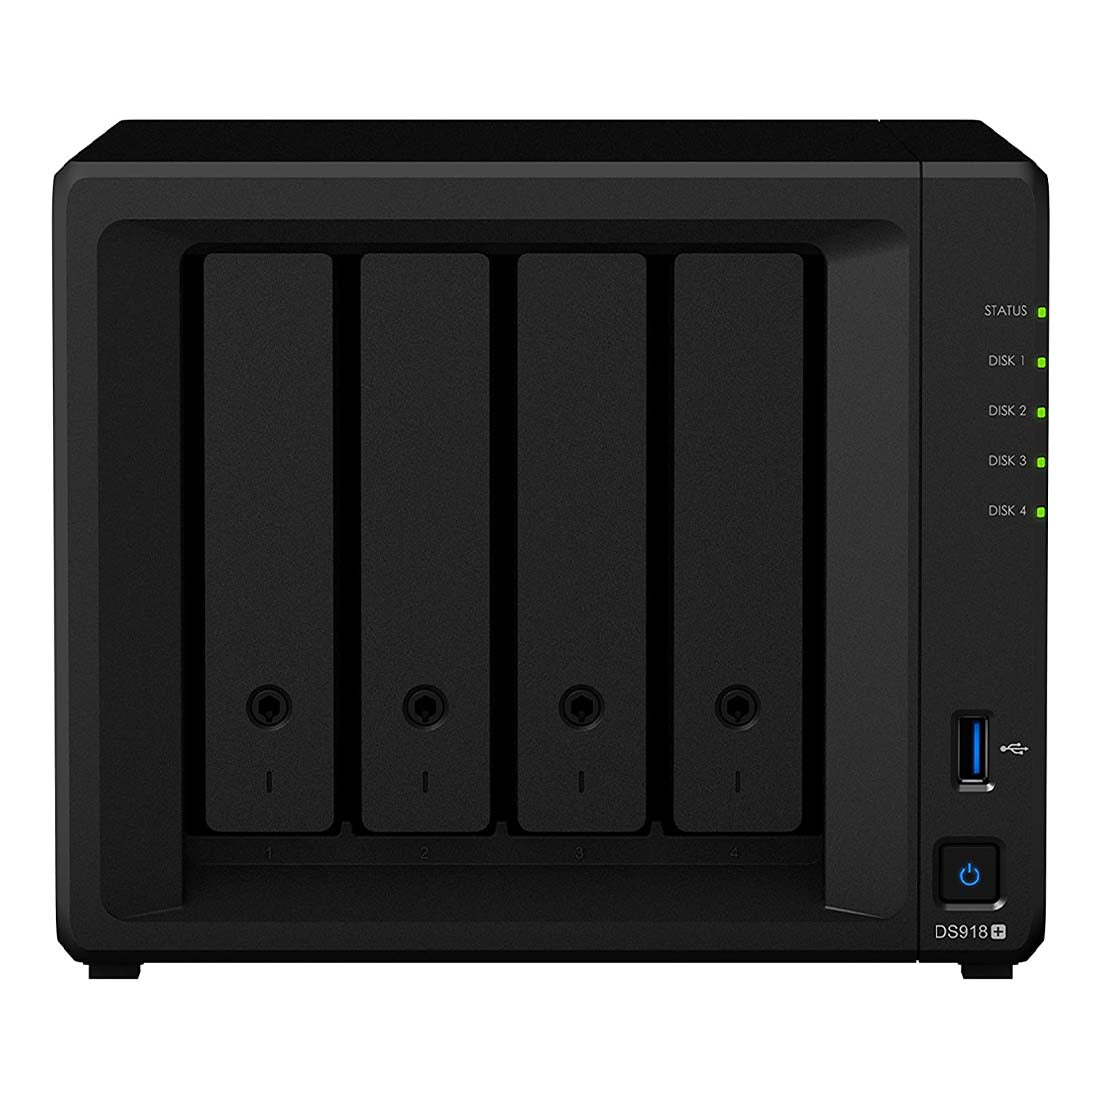 Synology Diskstation DS918+ 4 Bay Quad core 4 GB DDR3L NAS Device